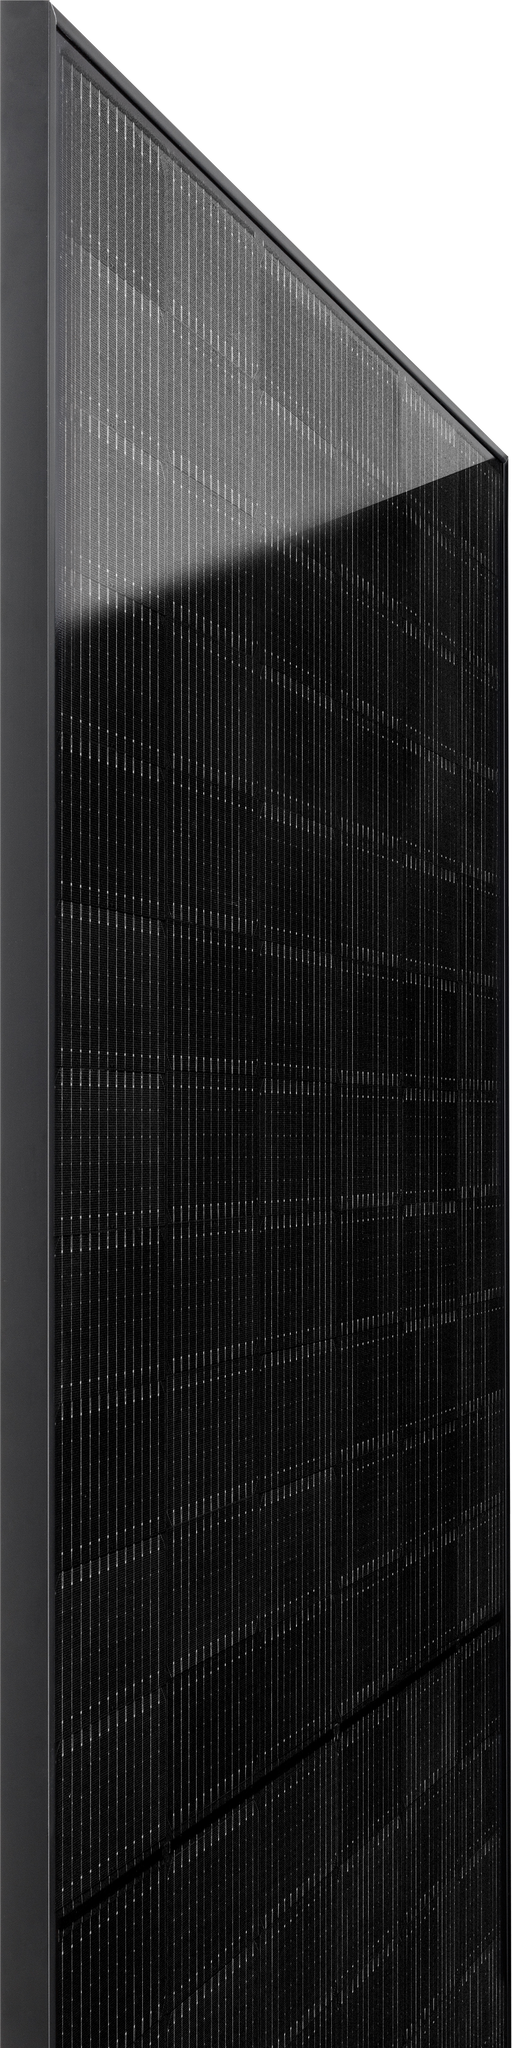 QCELL 360W Q.PEAK DUO BLK-G10+ Black Frame Solar Panel - 20.3% Max Efficiency 360W Panel for Homes & Commercial